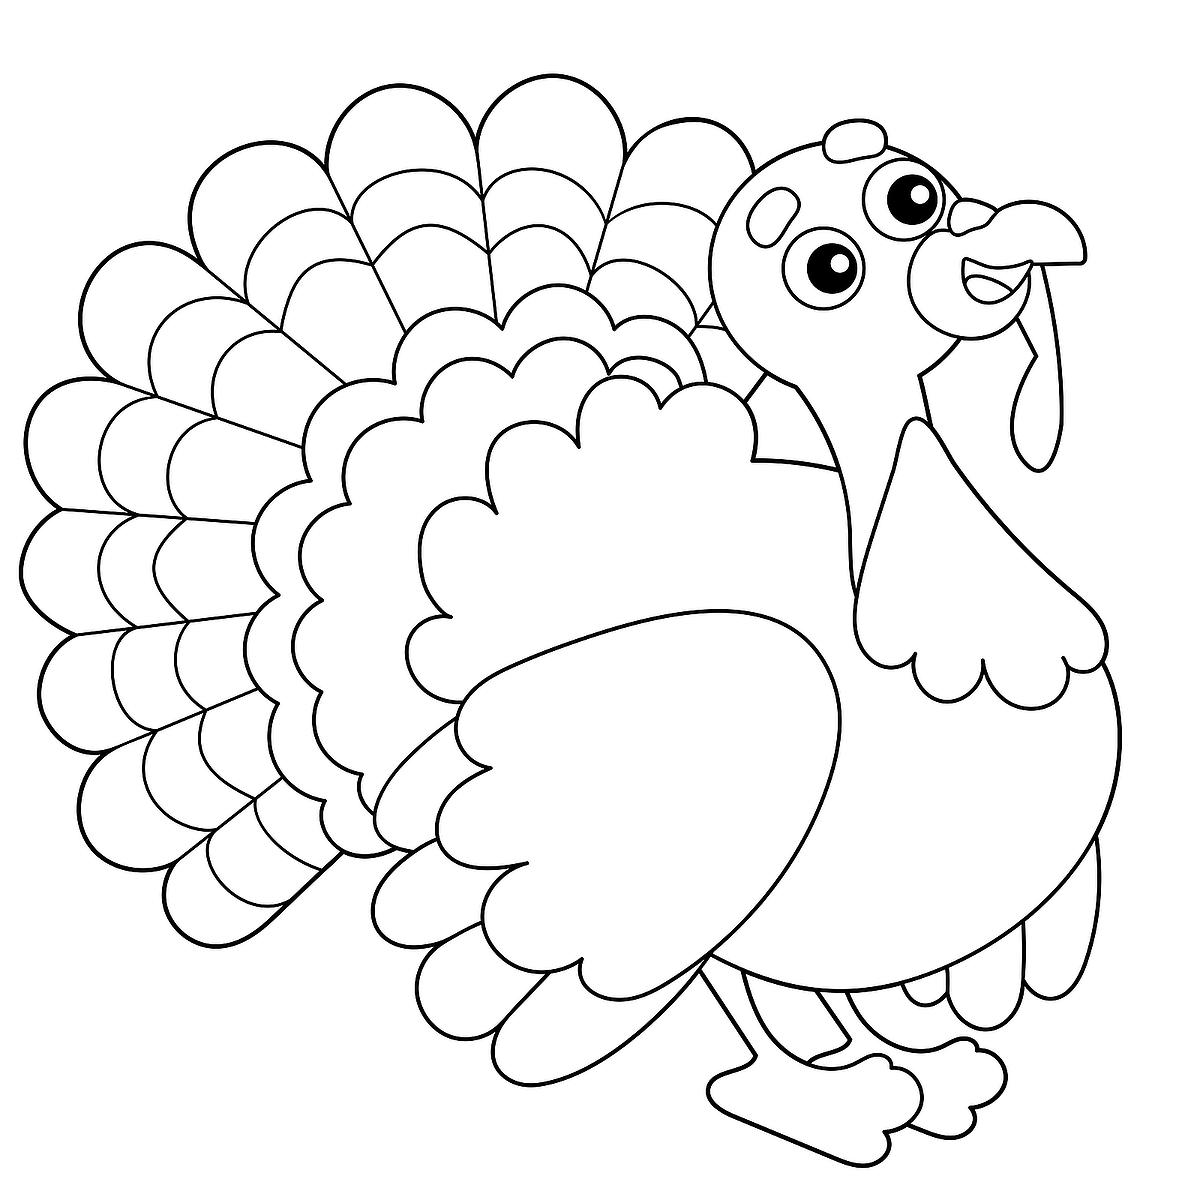 Turkey coloring pages free fun printable coloring activity pages of turkeys for thanksgiving printables mom